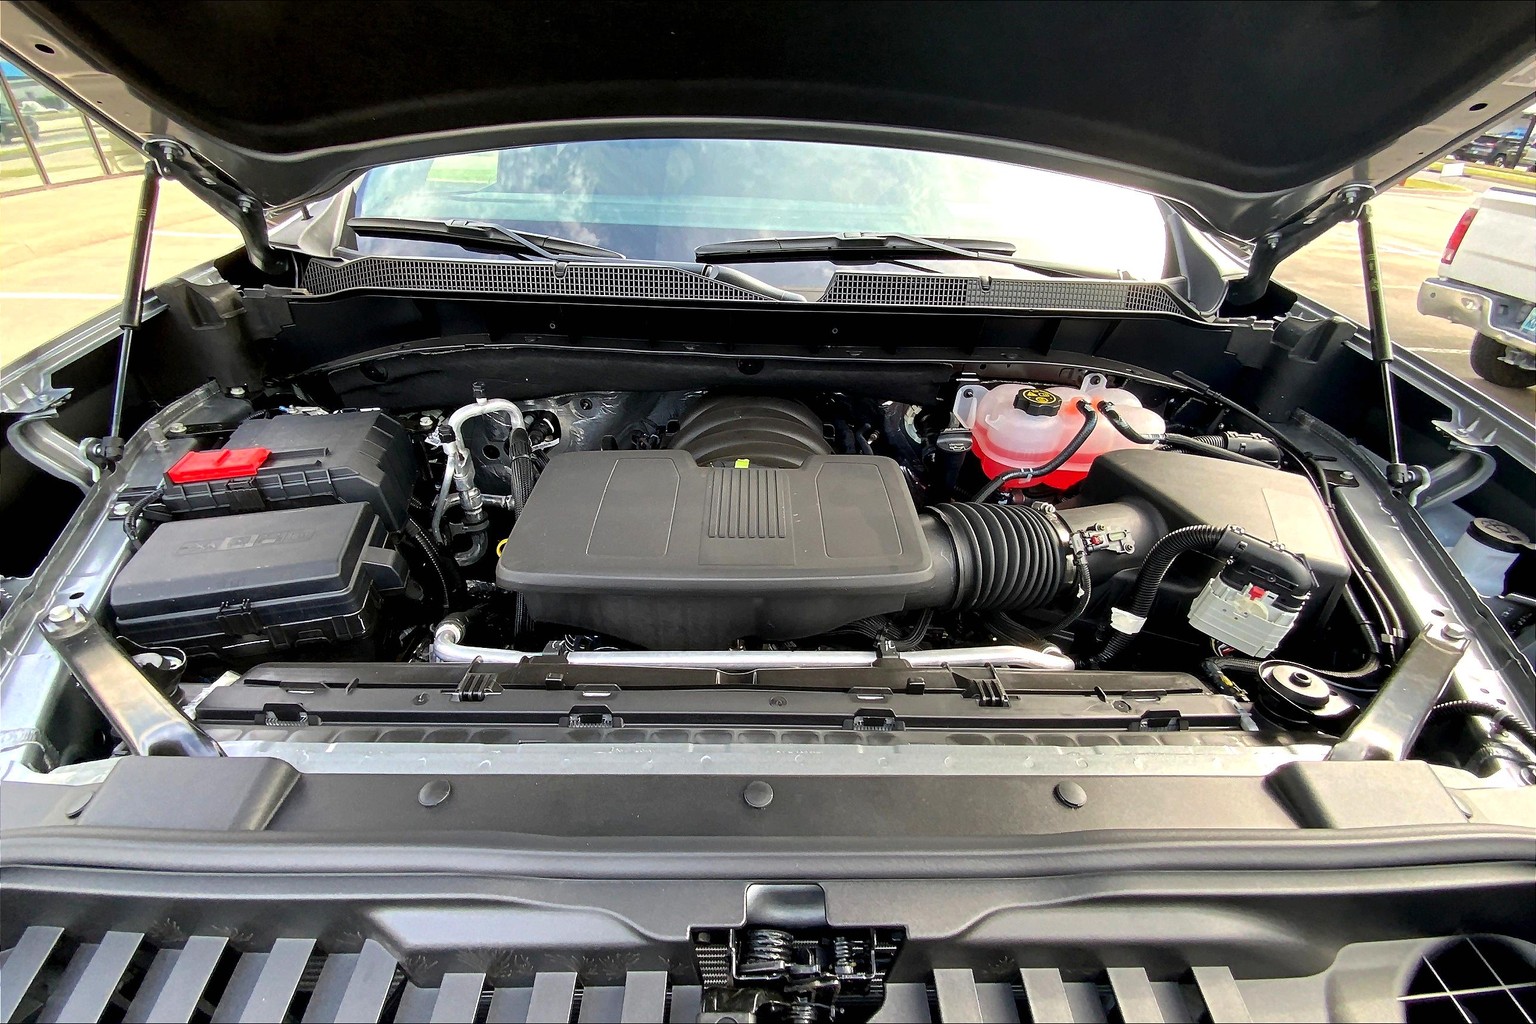 Volvo XC60 How To Open Hood & Access Engine Bay 2010 2011 2012